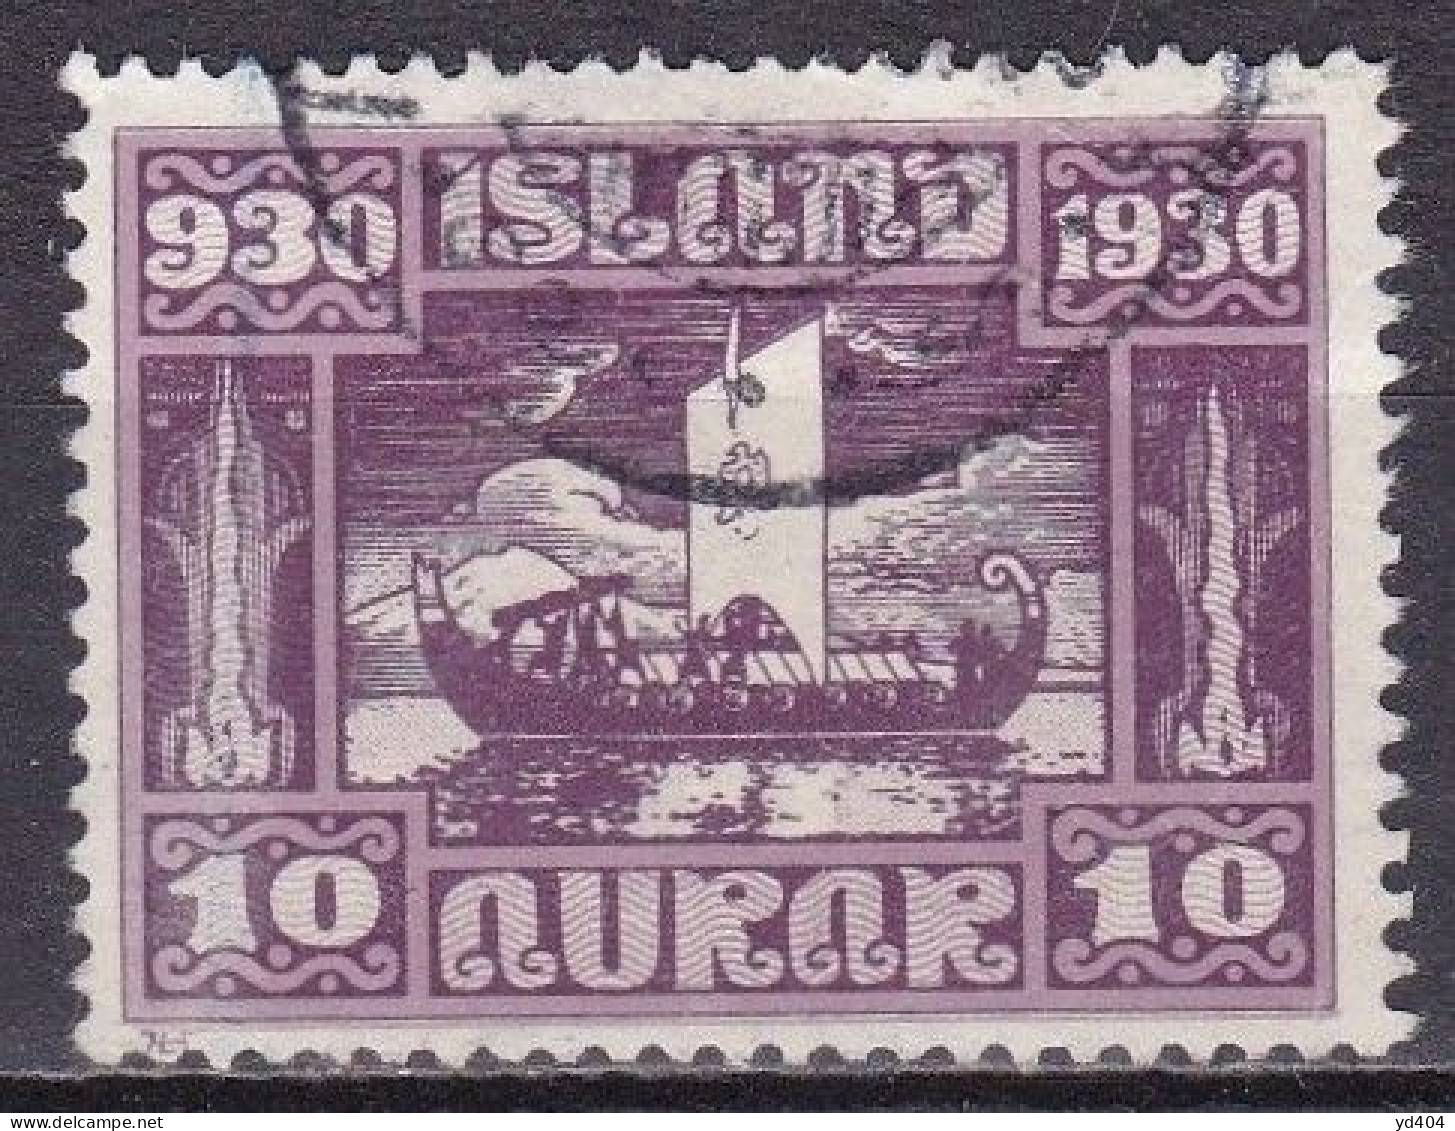 IS020D – ISLANDE – ICELAND – 1930 – MILLENARY OF THE ALTHING – SG # 161 USED 20 € - Usados